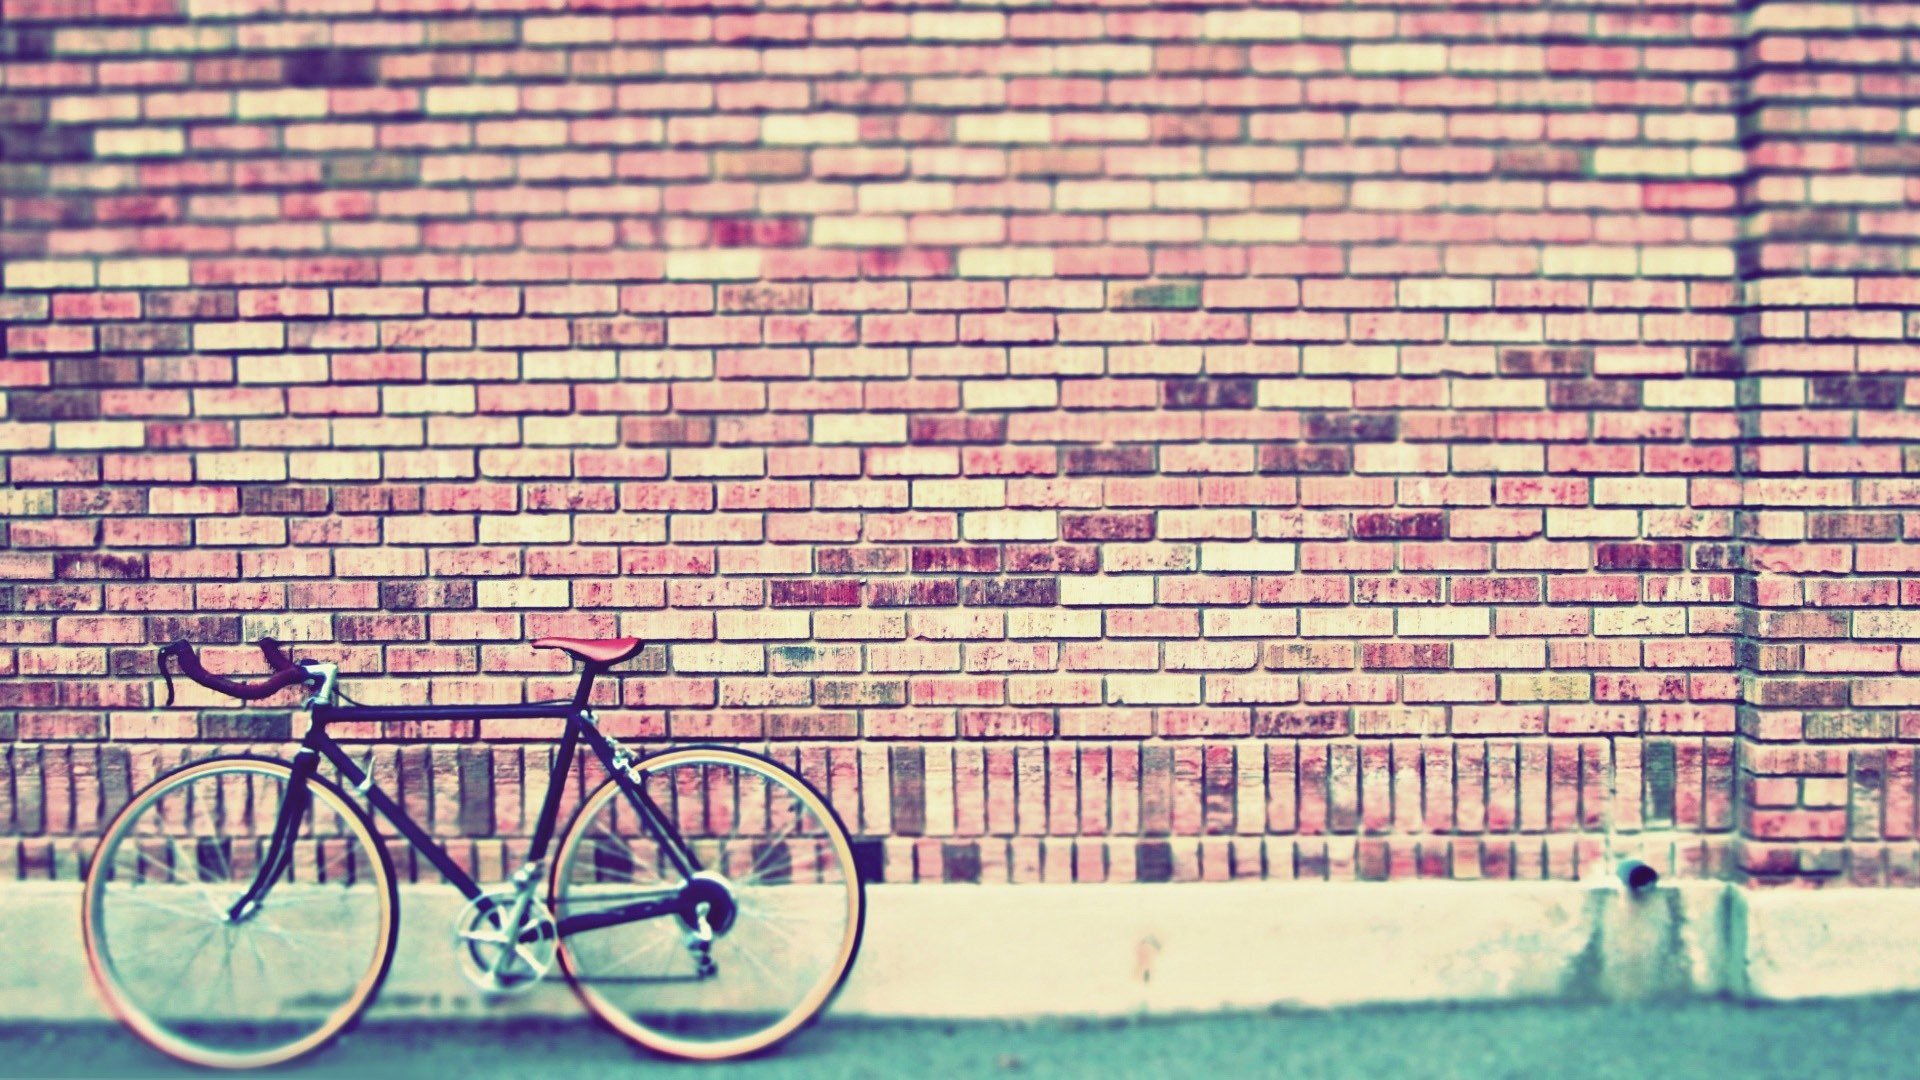 Tumblr Backgrounds Brick Wall